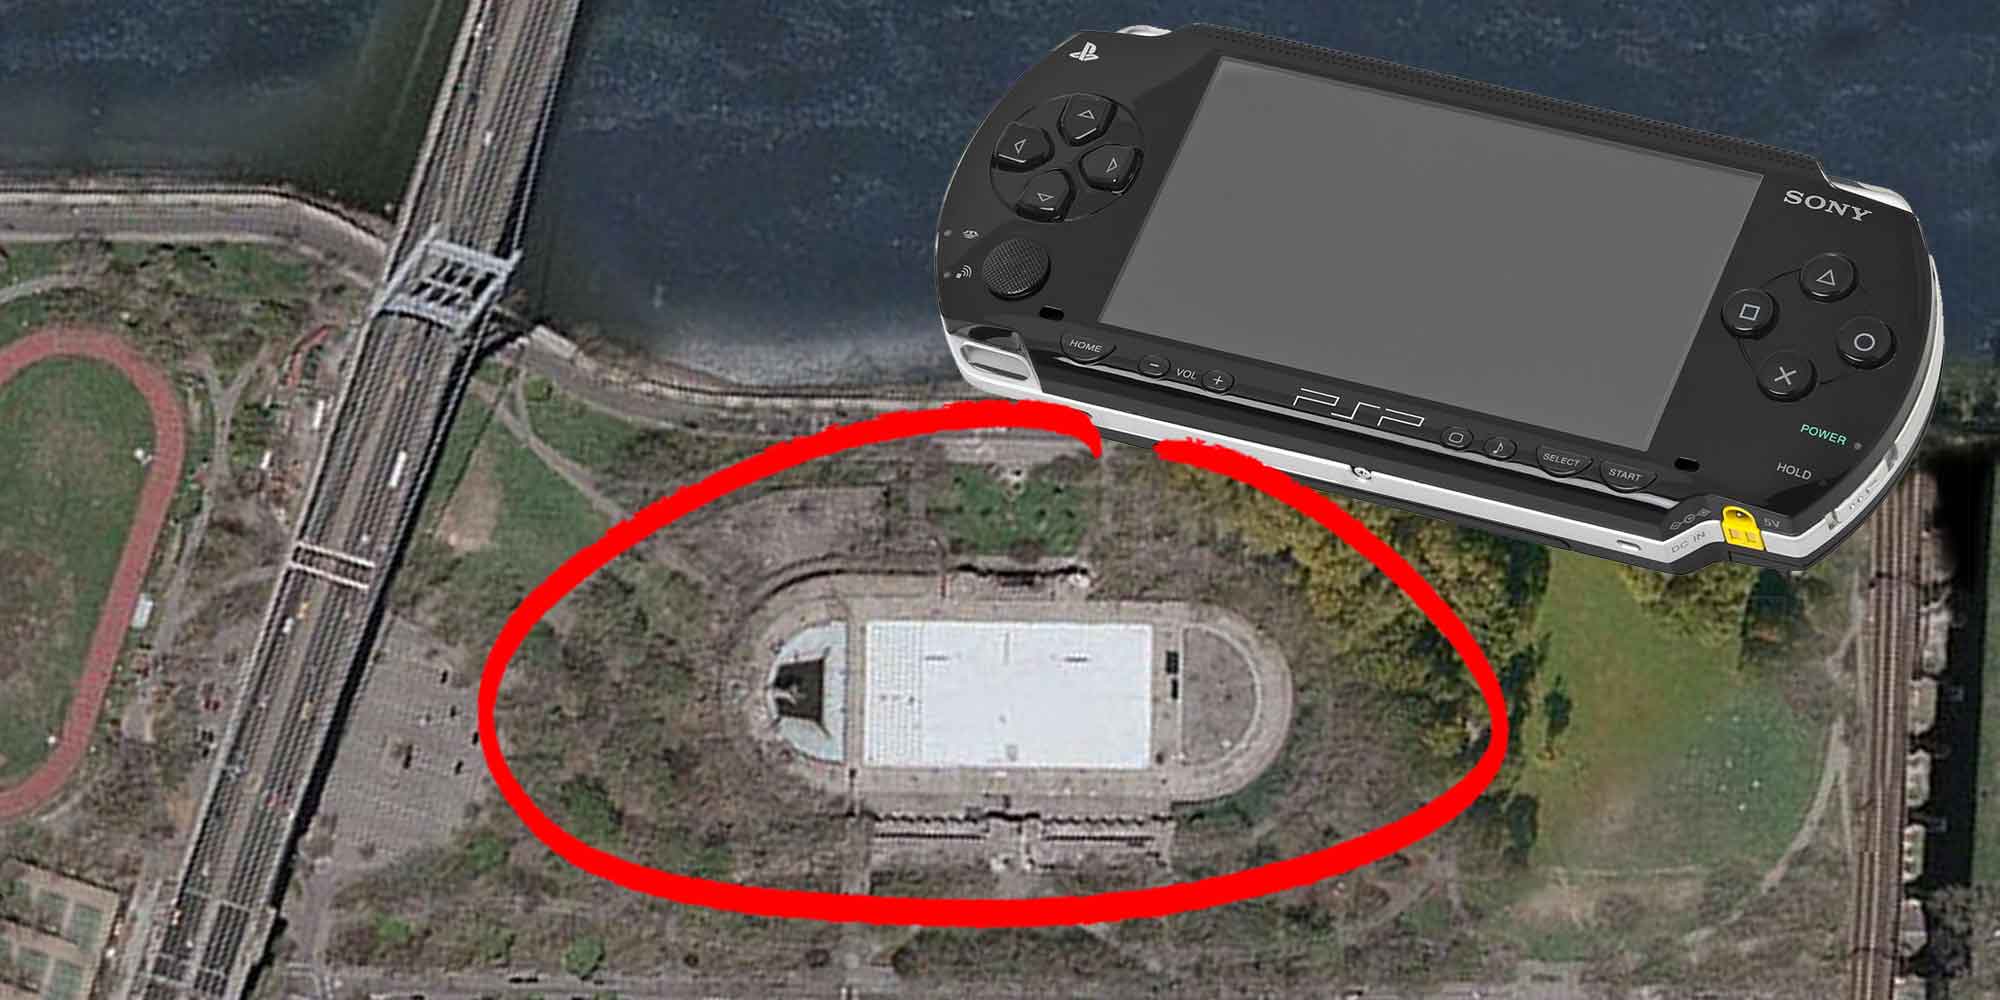 Google Maps User Finds A Giant Sony PSP In New York City